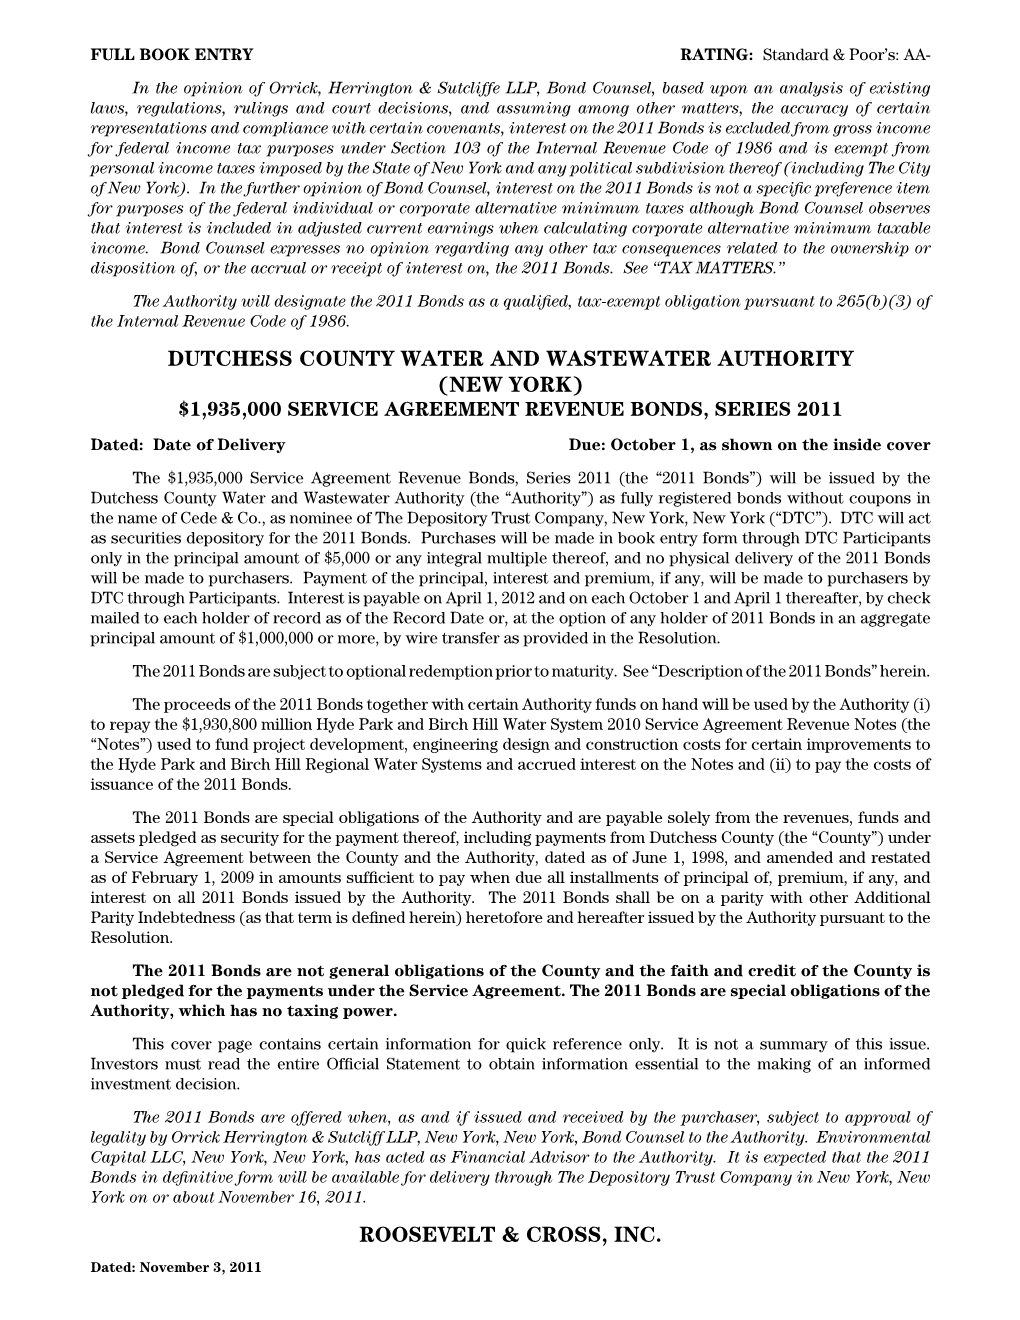 Dutchess County Water and Wastewater Authority (New York) $1,935,000 Service Agreement Revenue Bonds, Series 2011